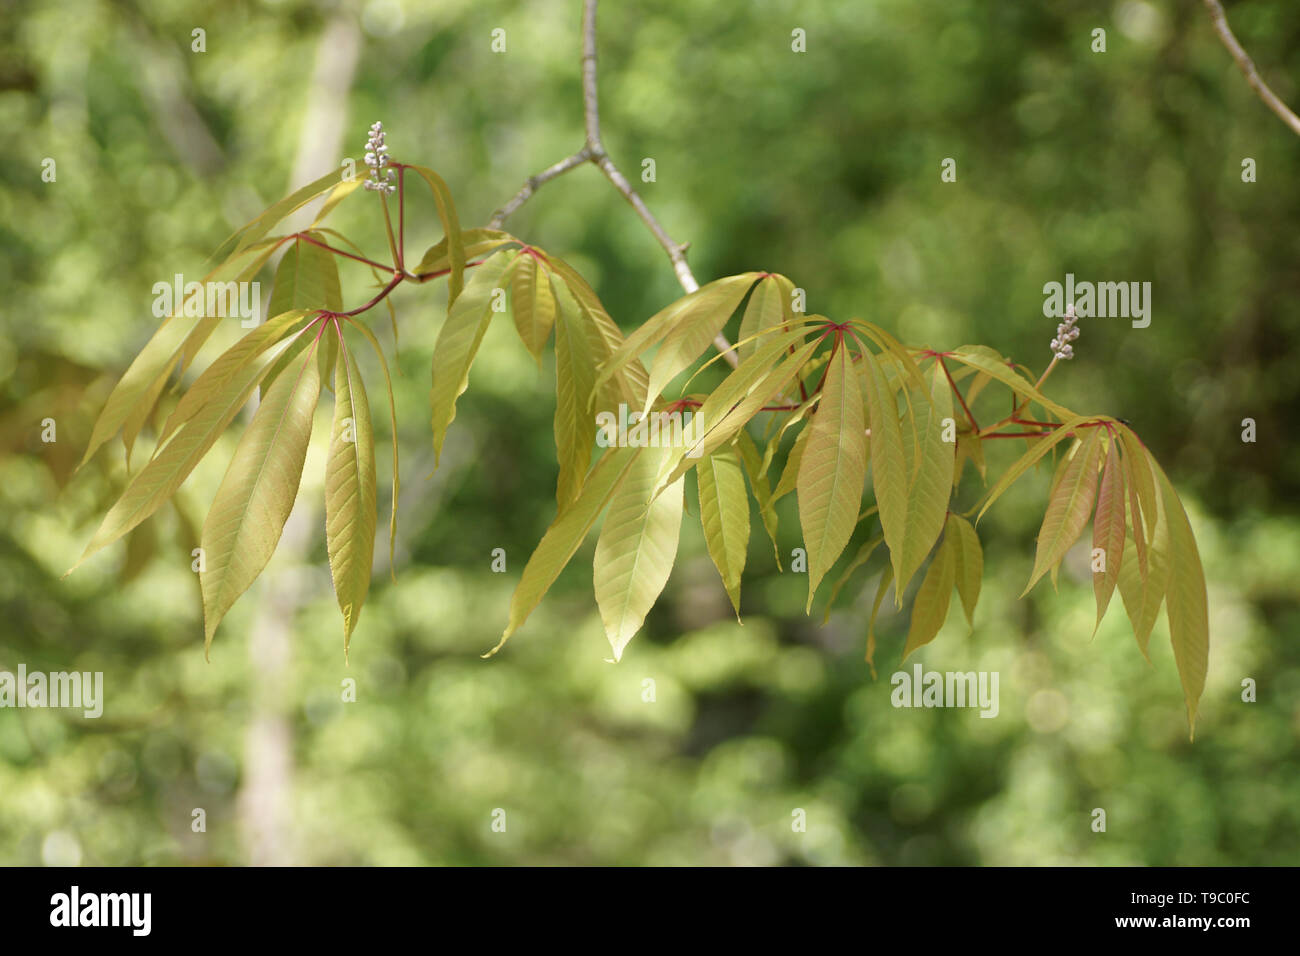 Aesculus indica at Clyne gardens, Swansea, Wales, UK. Stock Photo